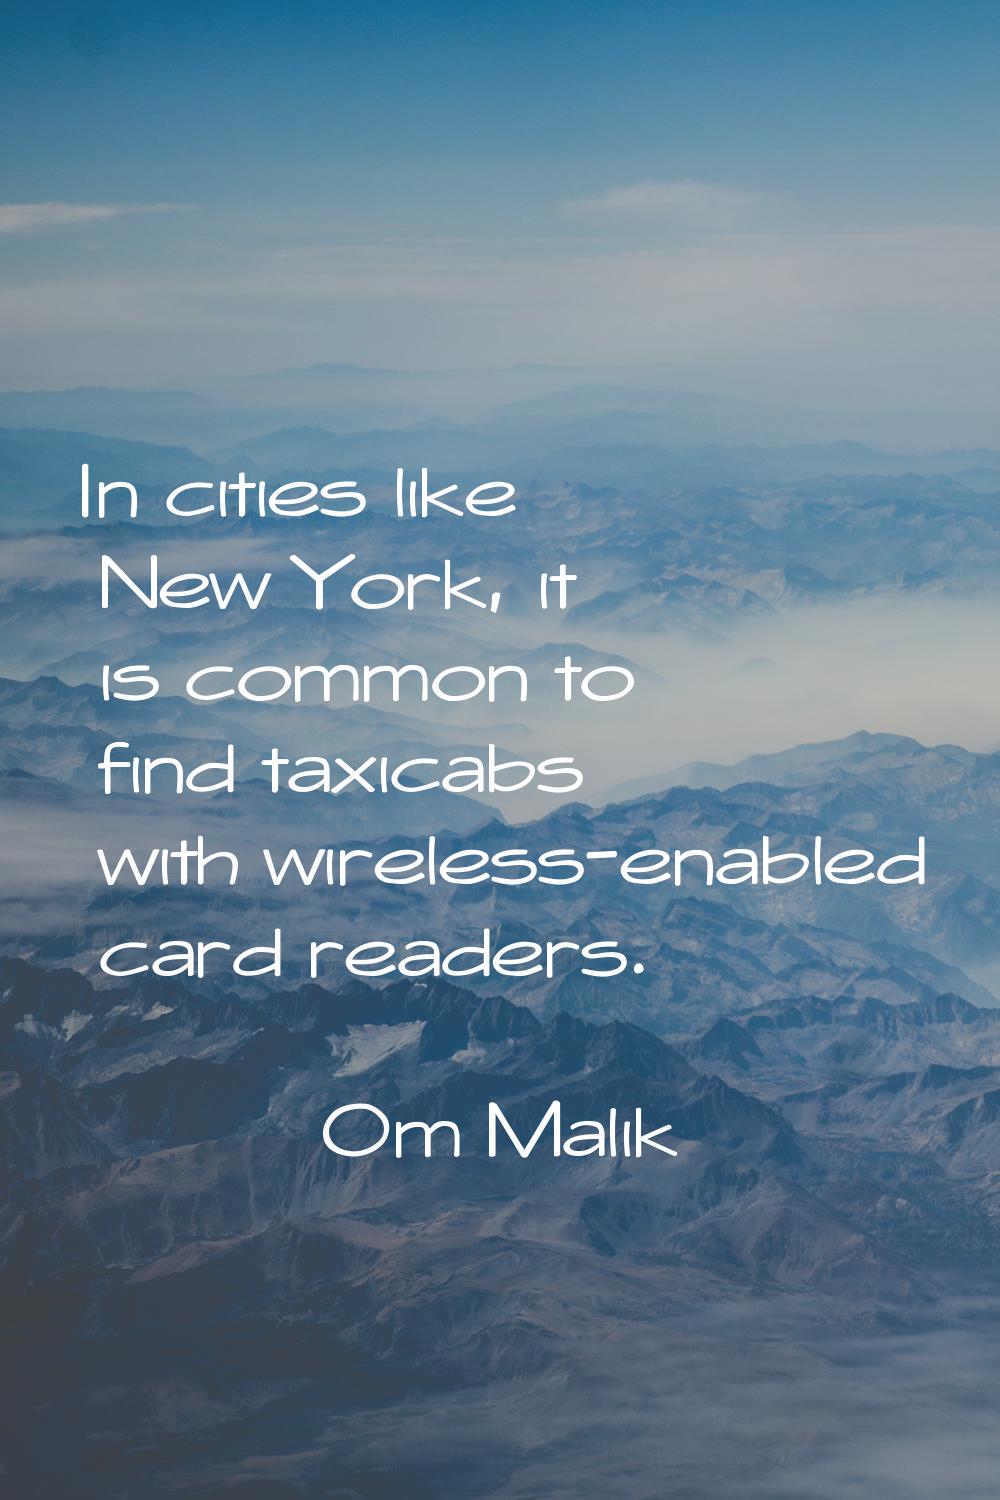 In cities like New York, it is common to find taxicabs with wireless-enabled card readers.